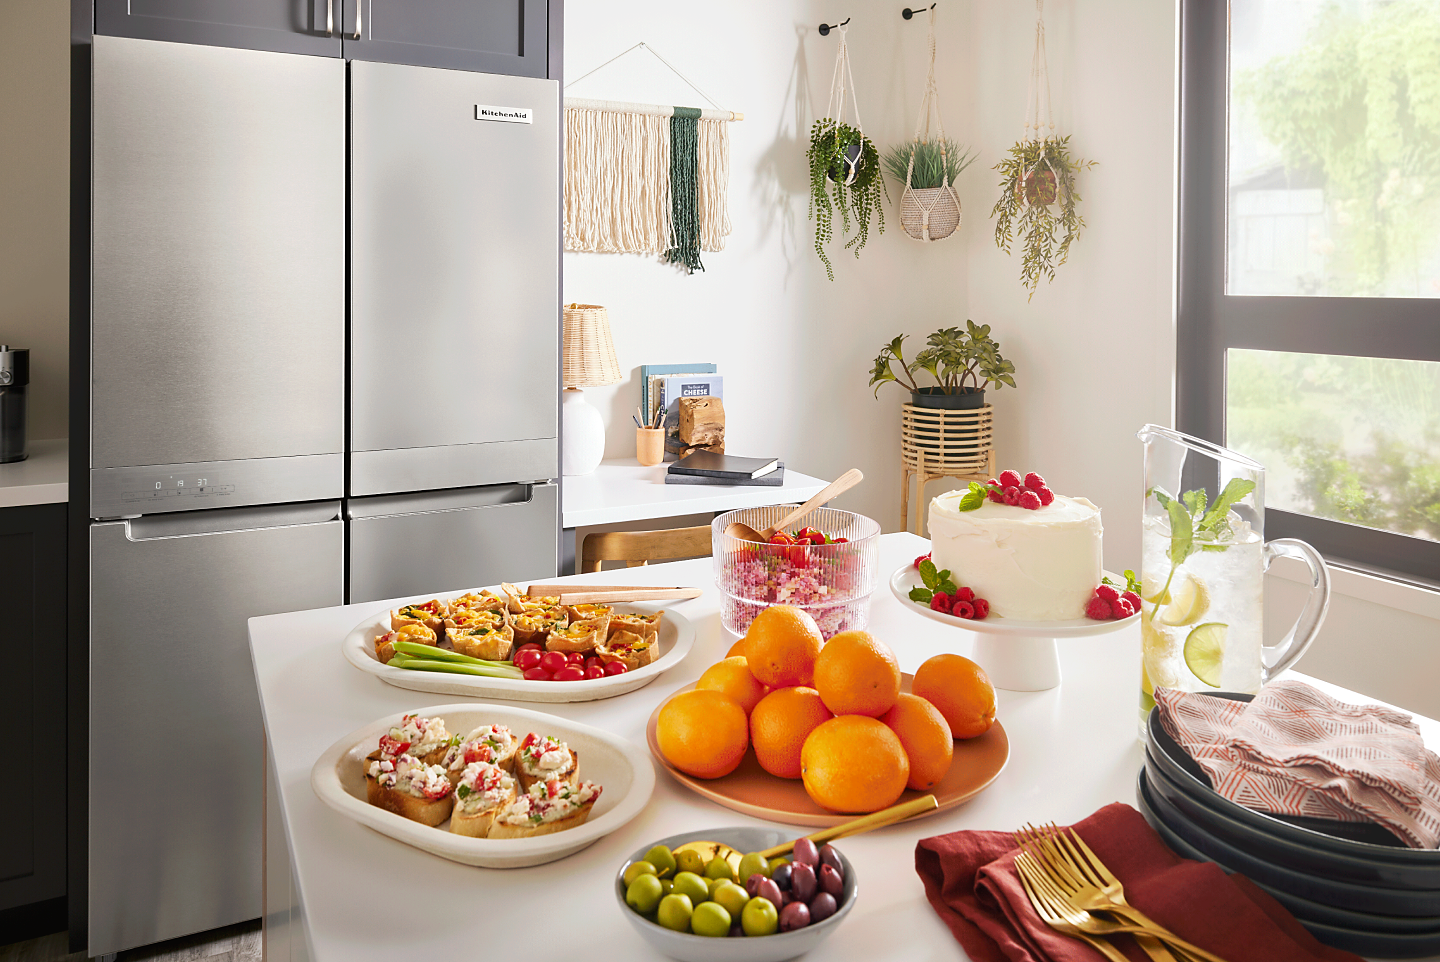 KitchenAid® four-door refrigerator across from an island counter with serving dishes full of food